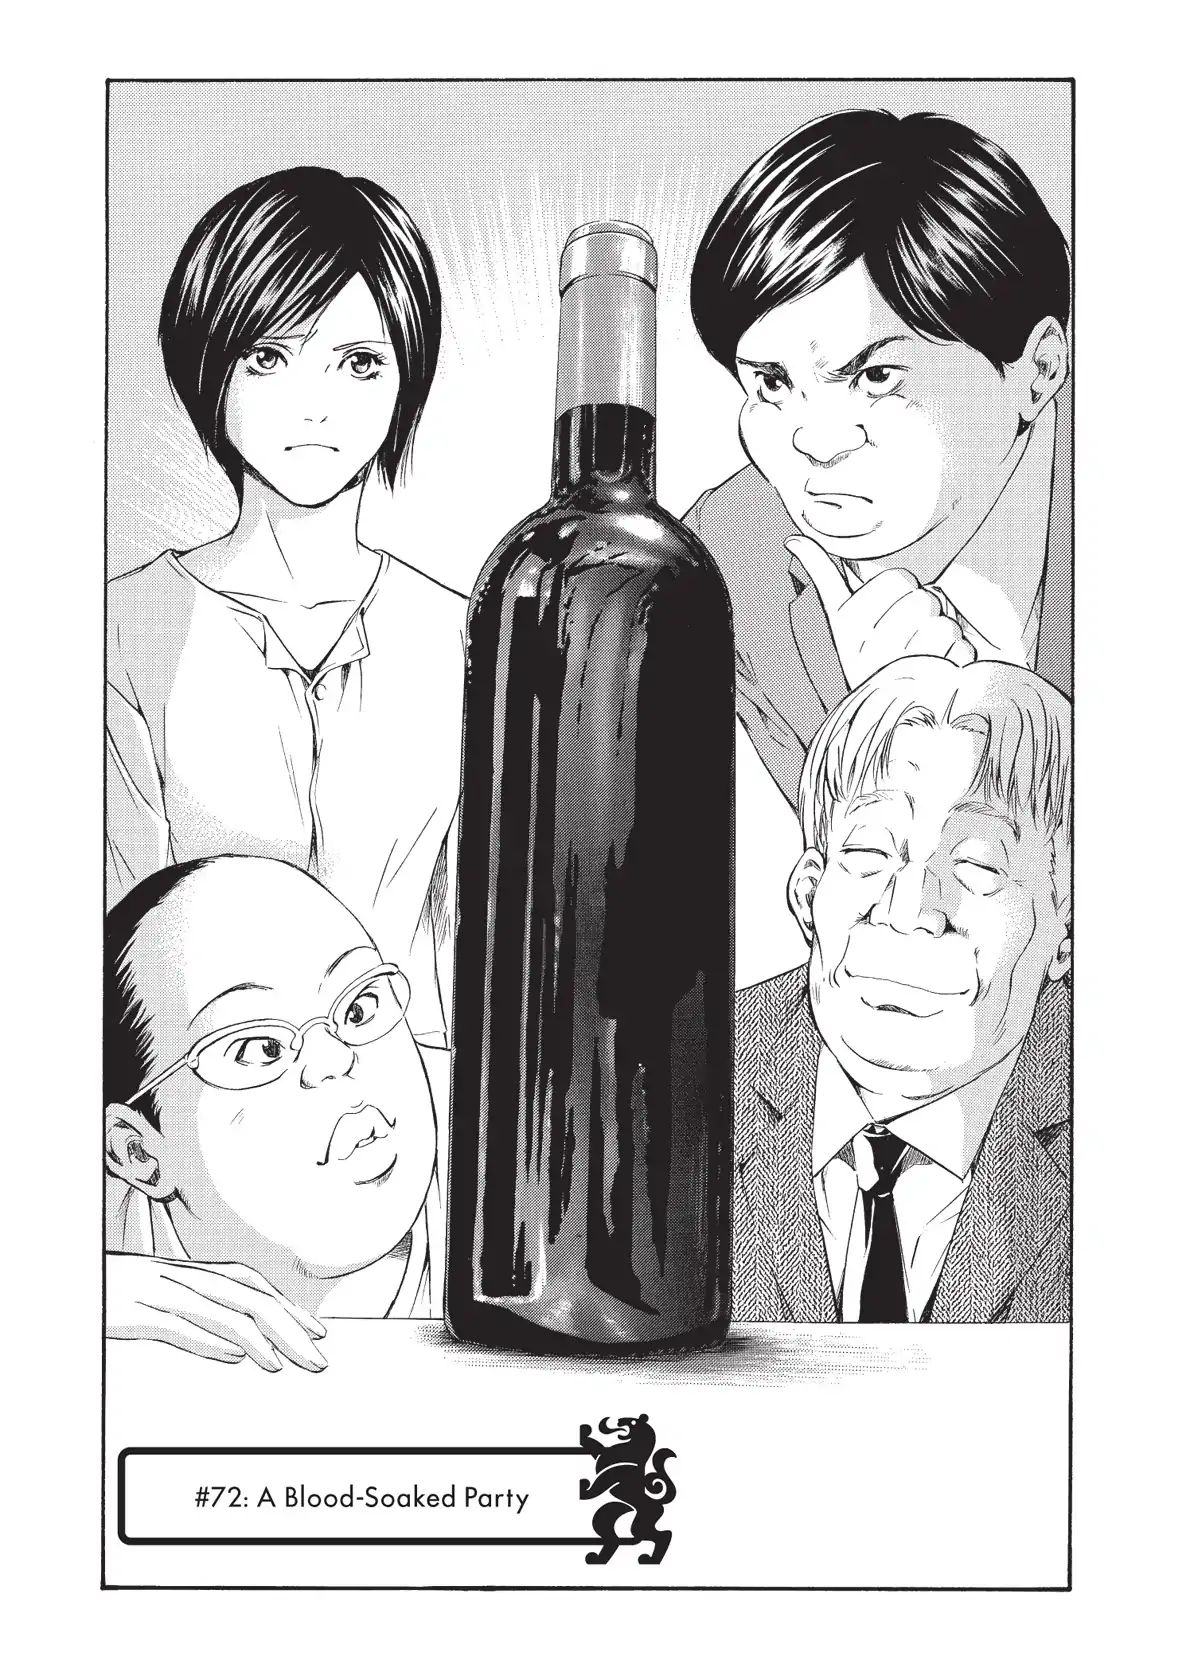 Kami No Shizuku Vol.4 Chapter 72: A Blood-Soaked Party - Picture 1